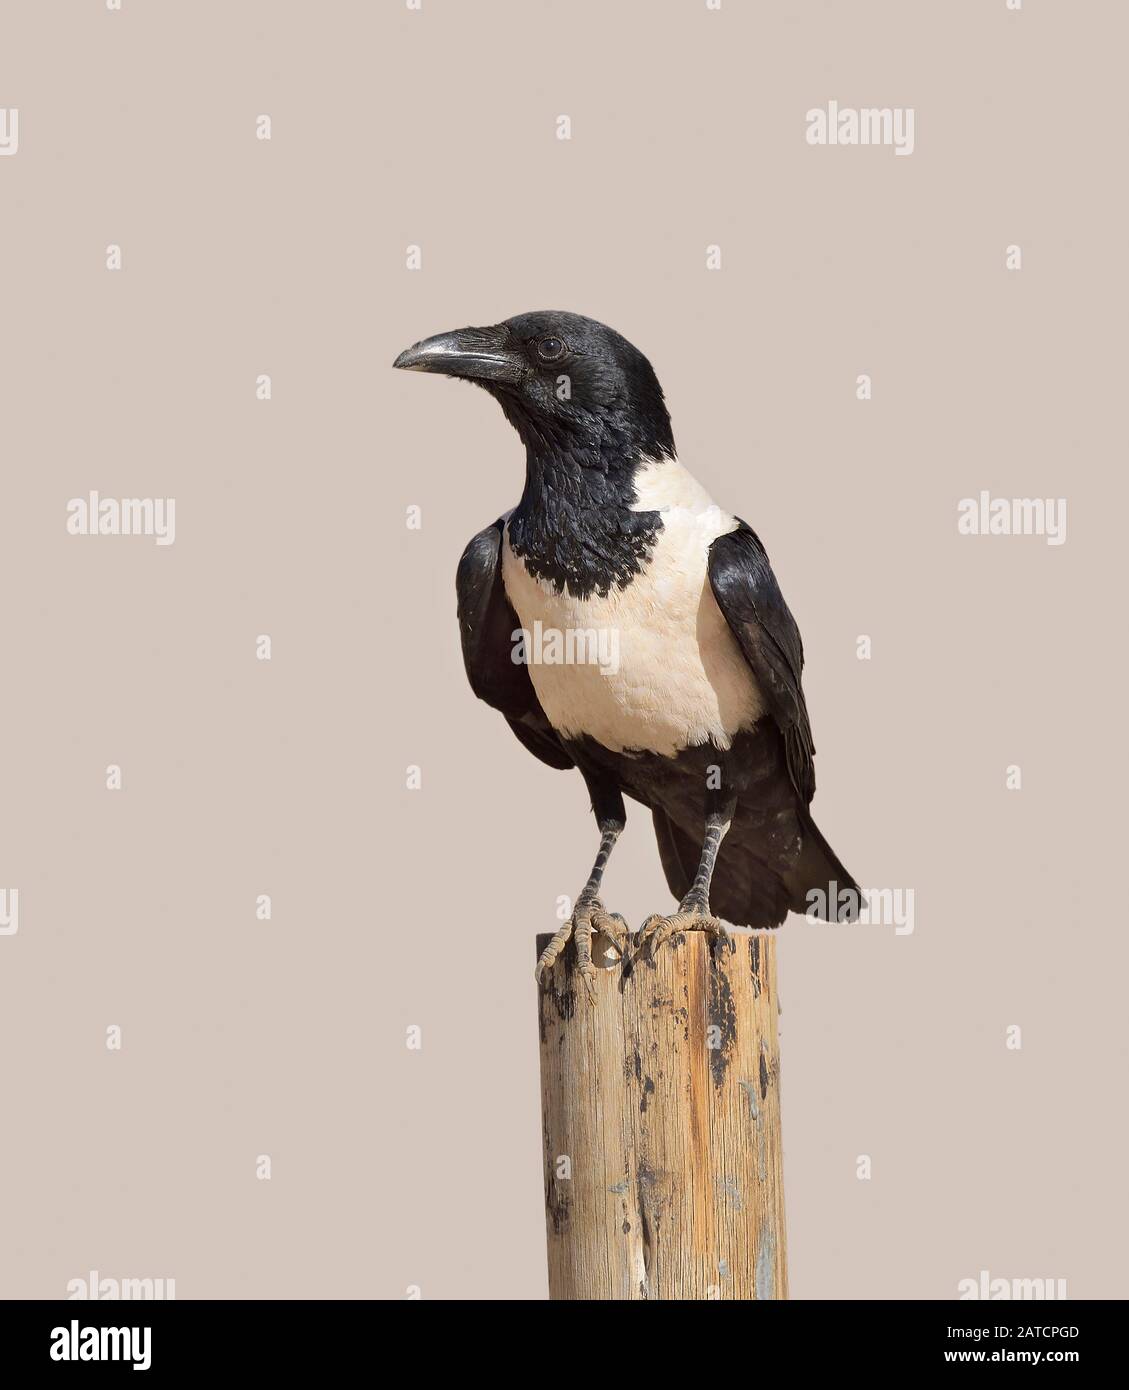 Pied Crow perched on a post Stock Photo